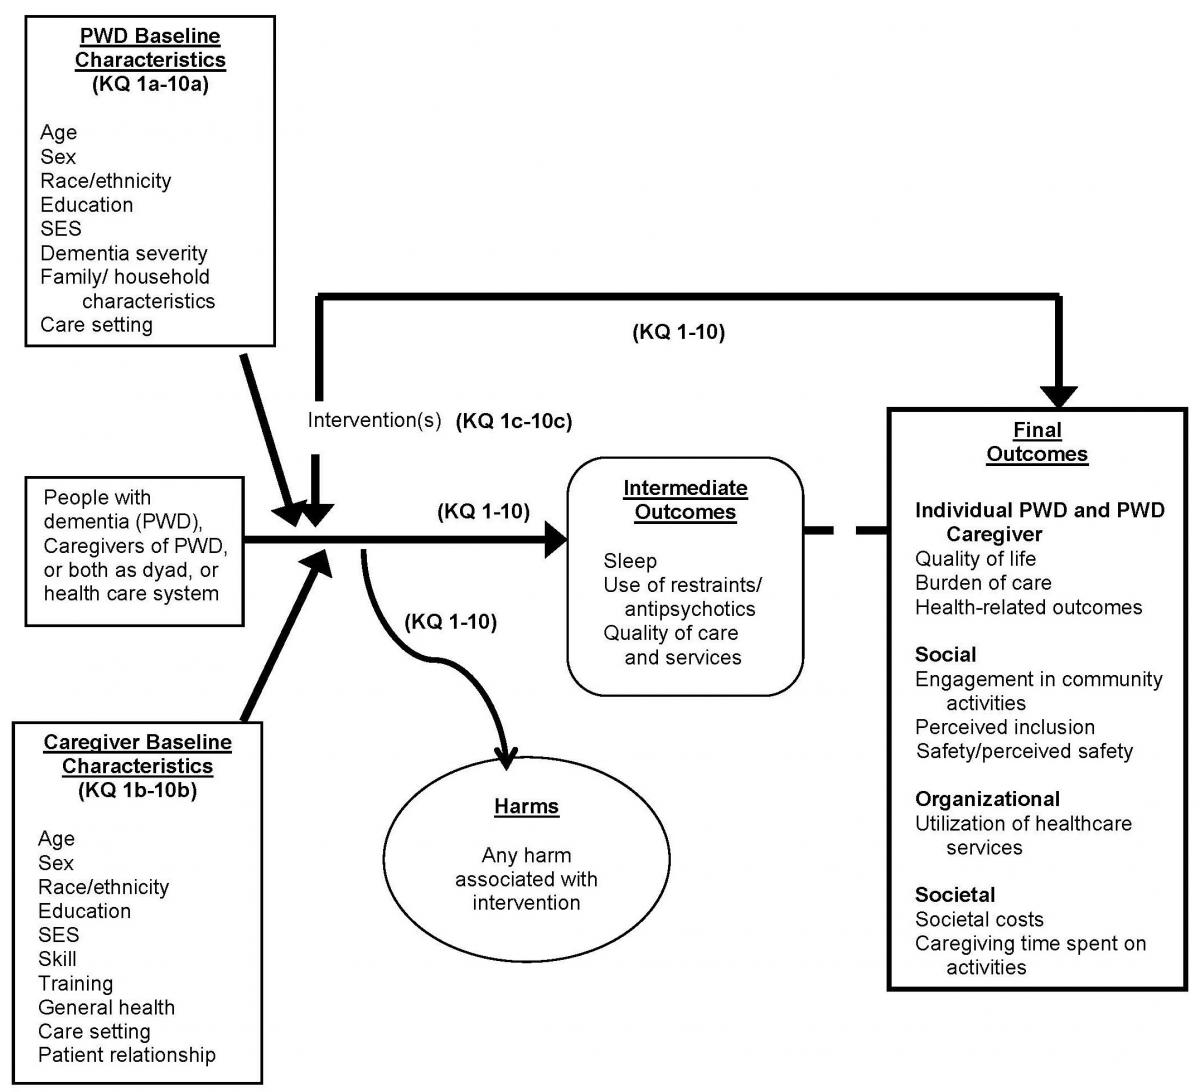 Figure 2 is the analytical framework describing the flow of people with dementia (PWD) and their caregivers through care intervention processes. PWD and caregivers receive nondrug care interventions leading to intermediate outcomes usch as improvements in sleep, quality of care and services, and use of restraints or antipsychotics for PWD. Interventions may have associated harms or unintended consequences. Final health outcomes for both caregivers and PWD include improvements in quality of life or other health outcomes. In addition PWD outcomes might include improvements in function, utilizaiton of healthcare services, and hospice outcomes such as concordance with preferred location of death. Outcomes may differ by PWD baseline characteristics (such as age, sex, education, or care setting) or caregiver baseline characteristics (such as age, sex, skill and training, general health, or patient relationship).